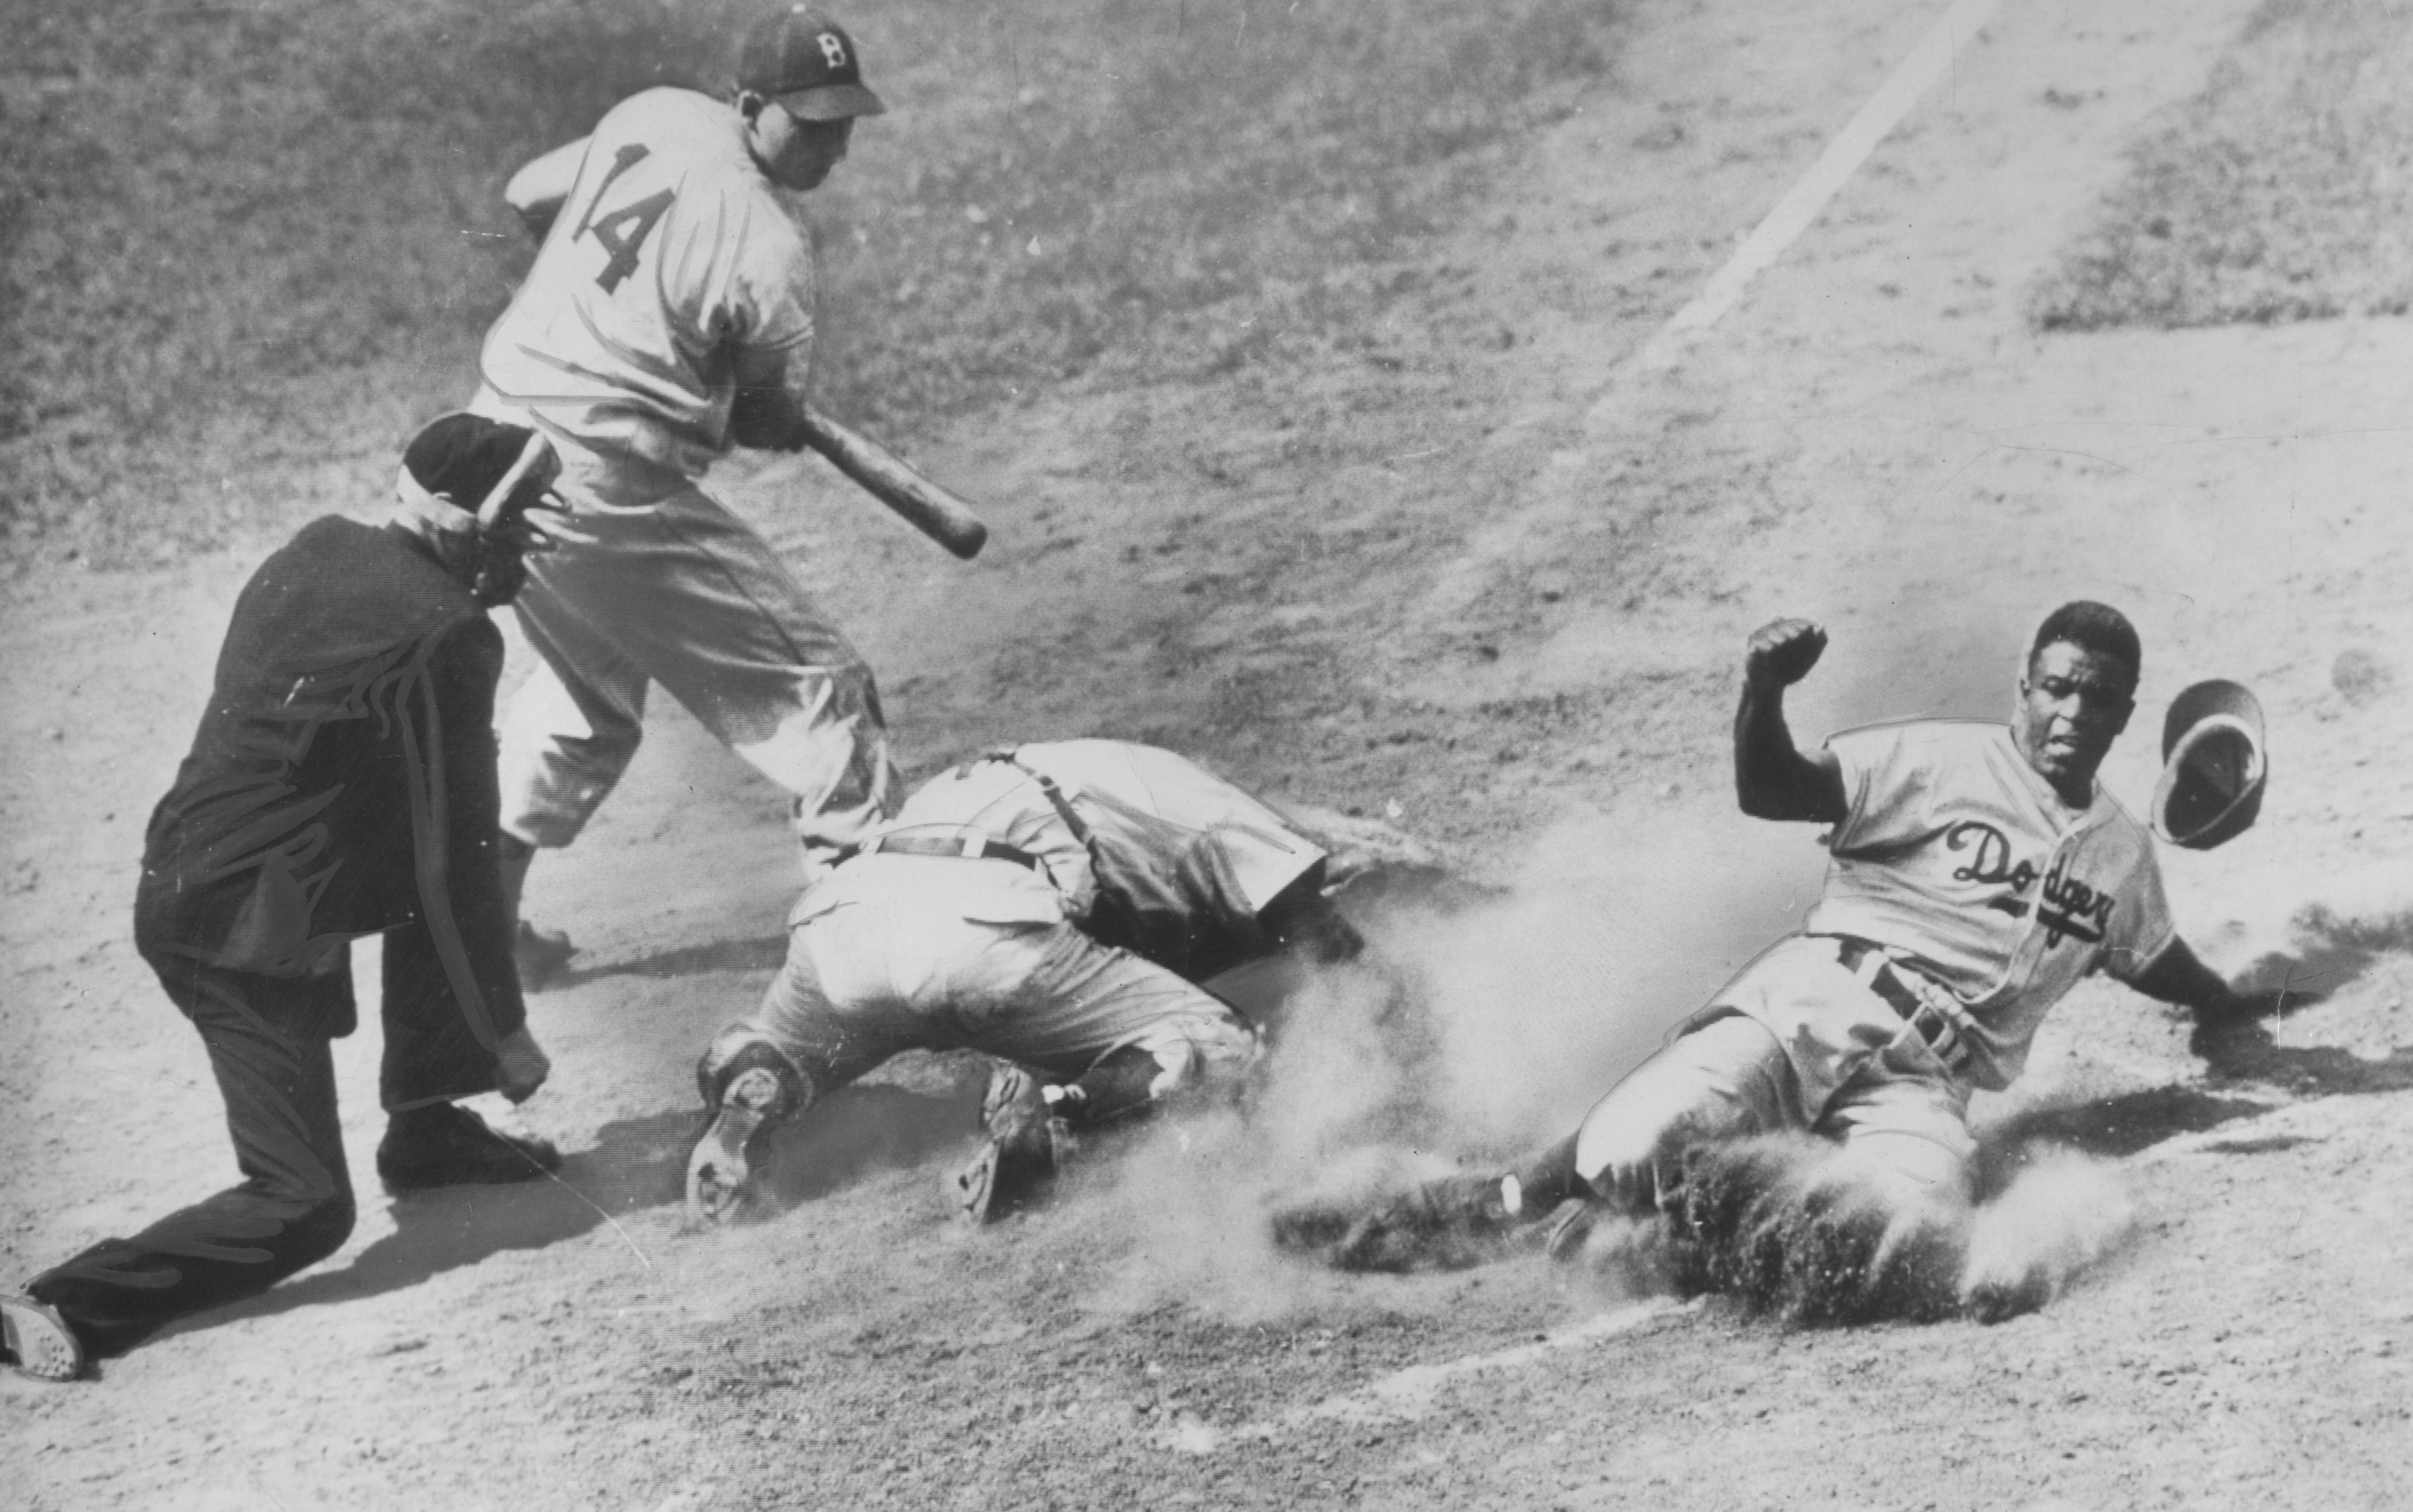  Jackie Robinson sliding into home plate during a baseball game in 1948 | Source: Getty Images